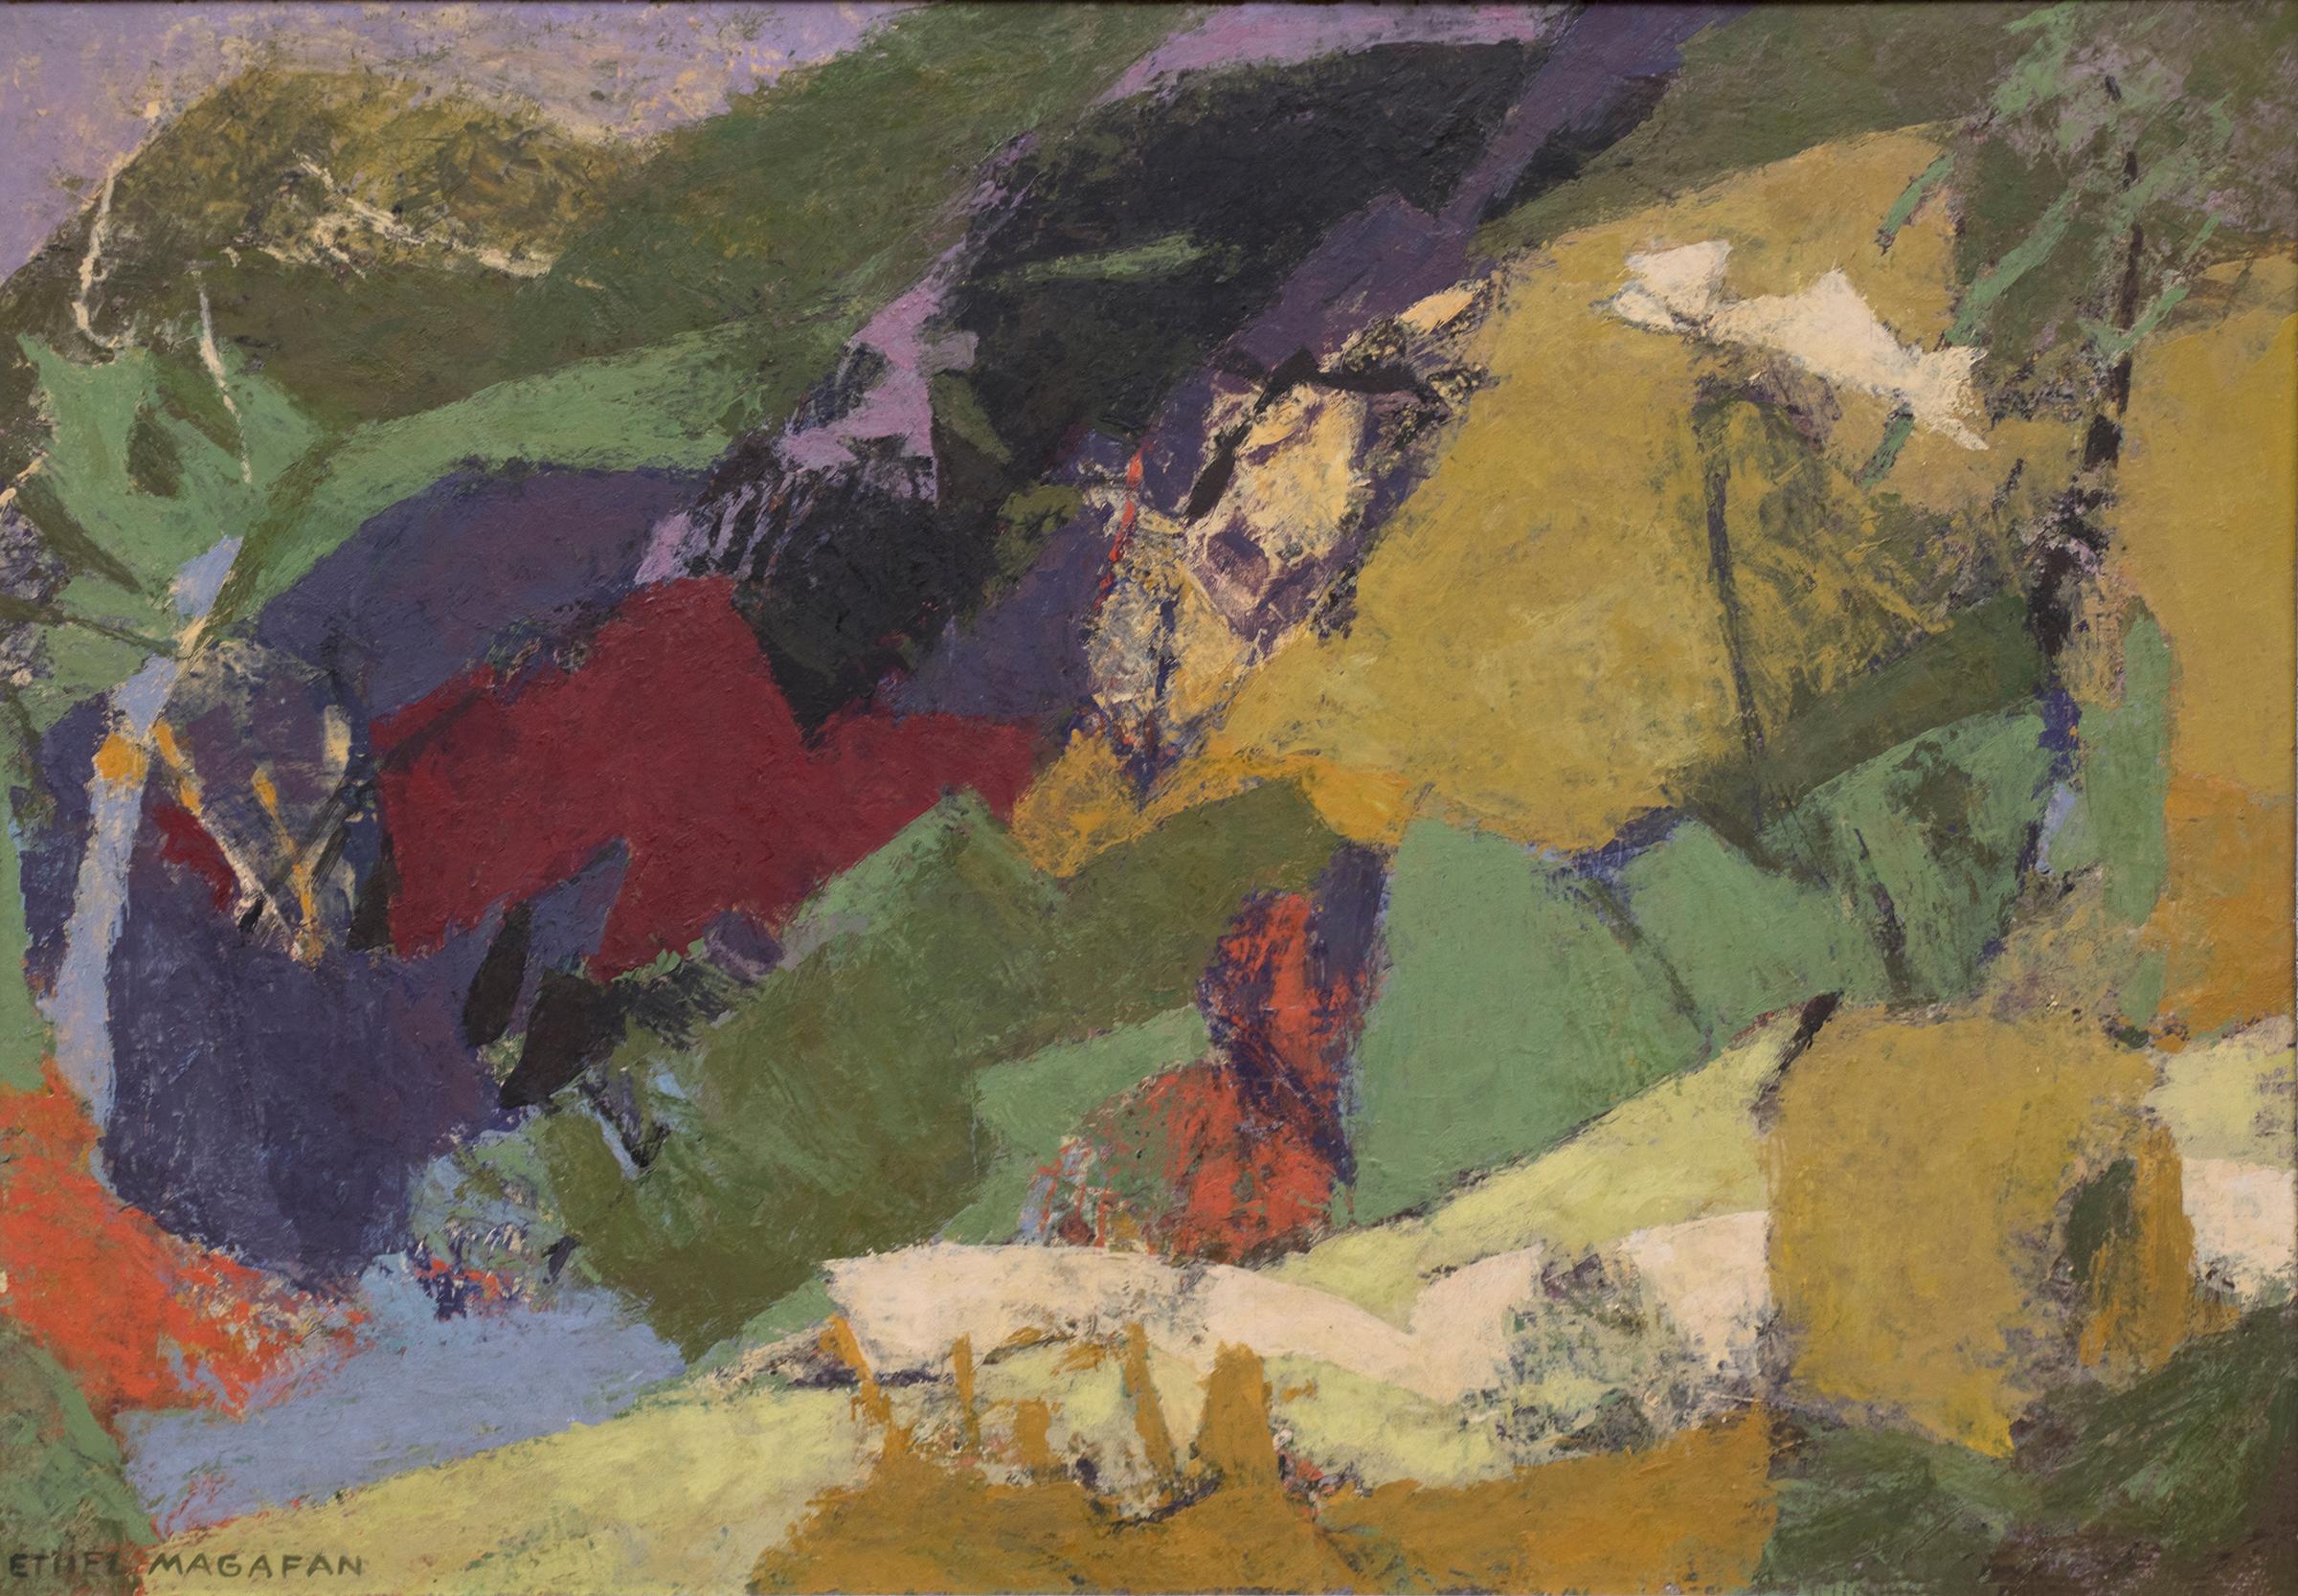 Mountain Lake (Abstract Colorado Landscape in Green, Gold, Red, Purple, Orange) - Painting by Ethel Magafan